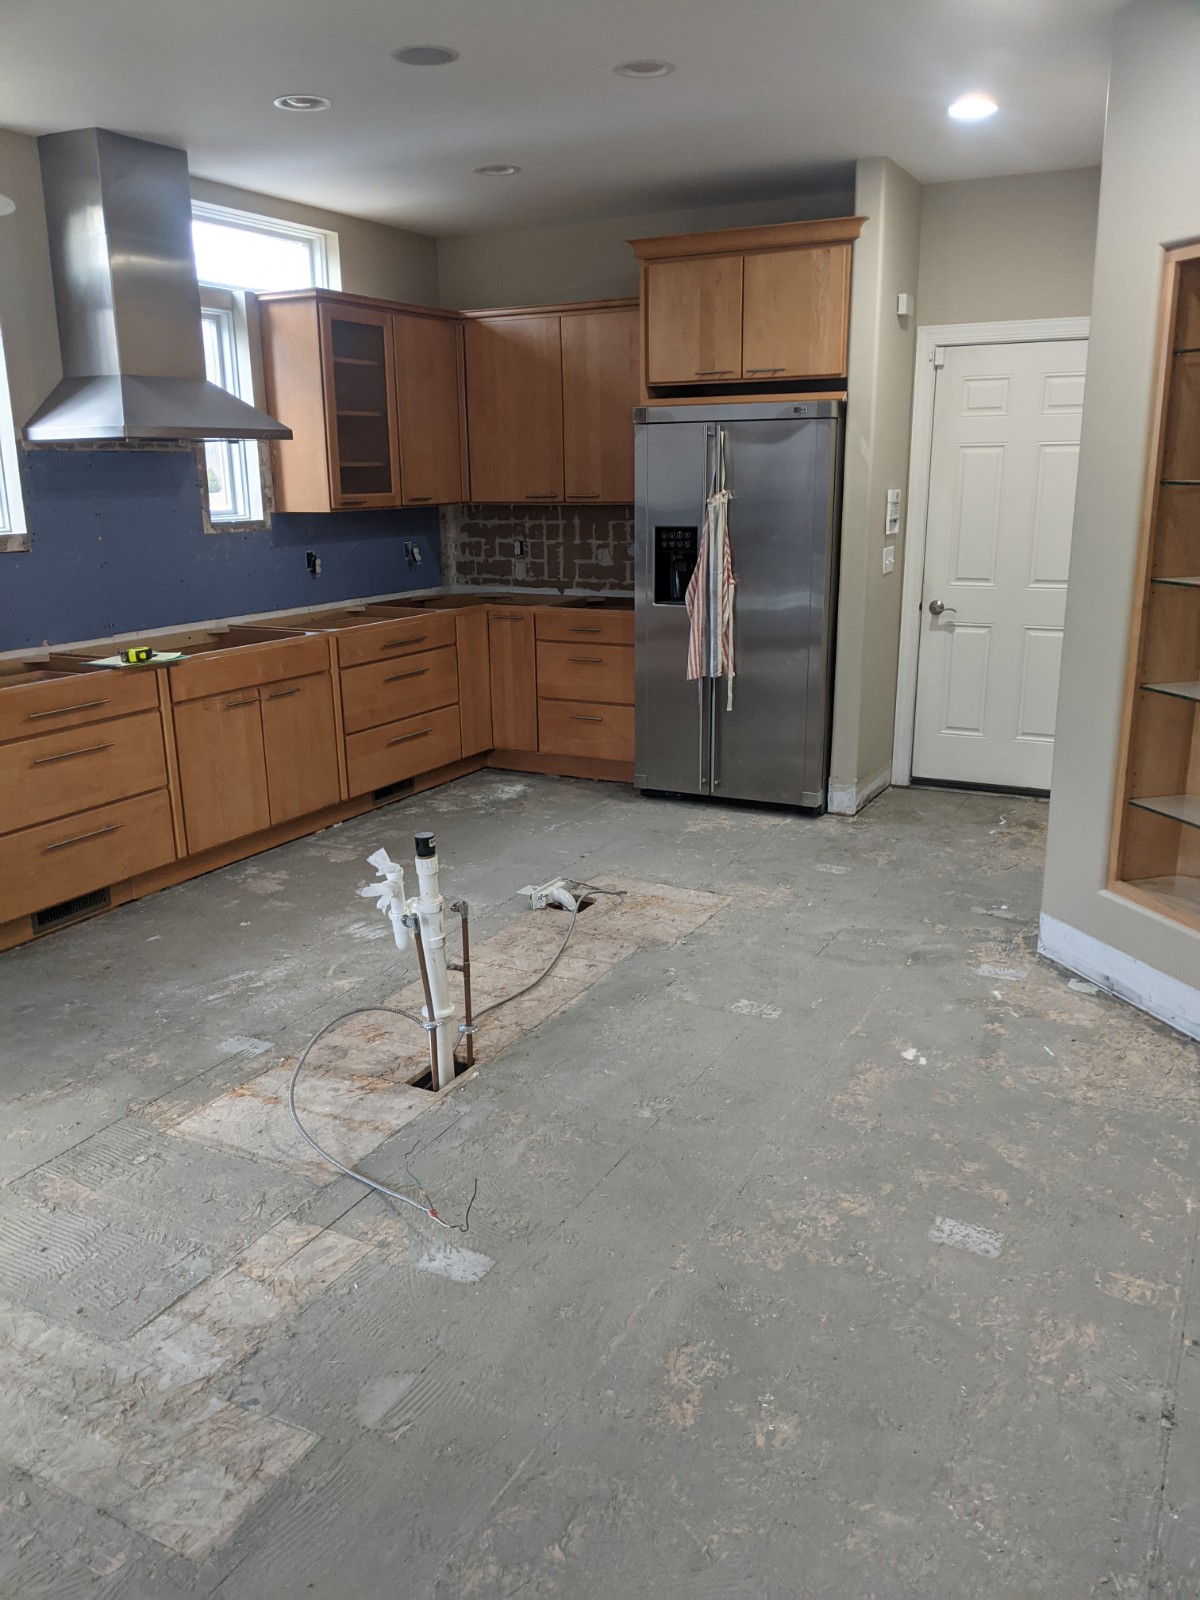 Before picture of Kitchen space.